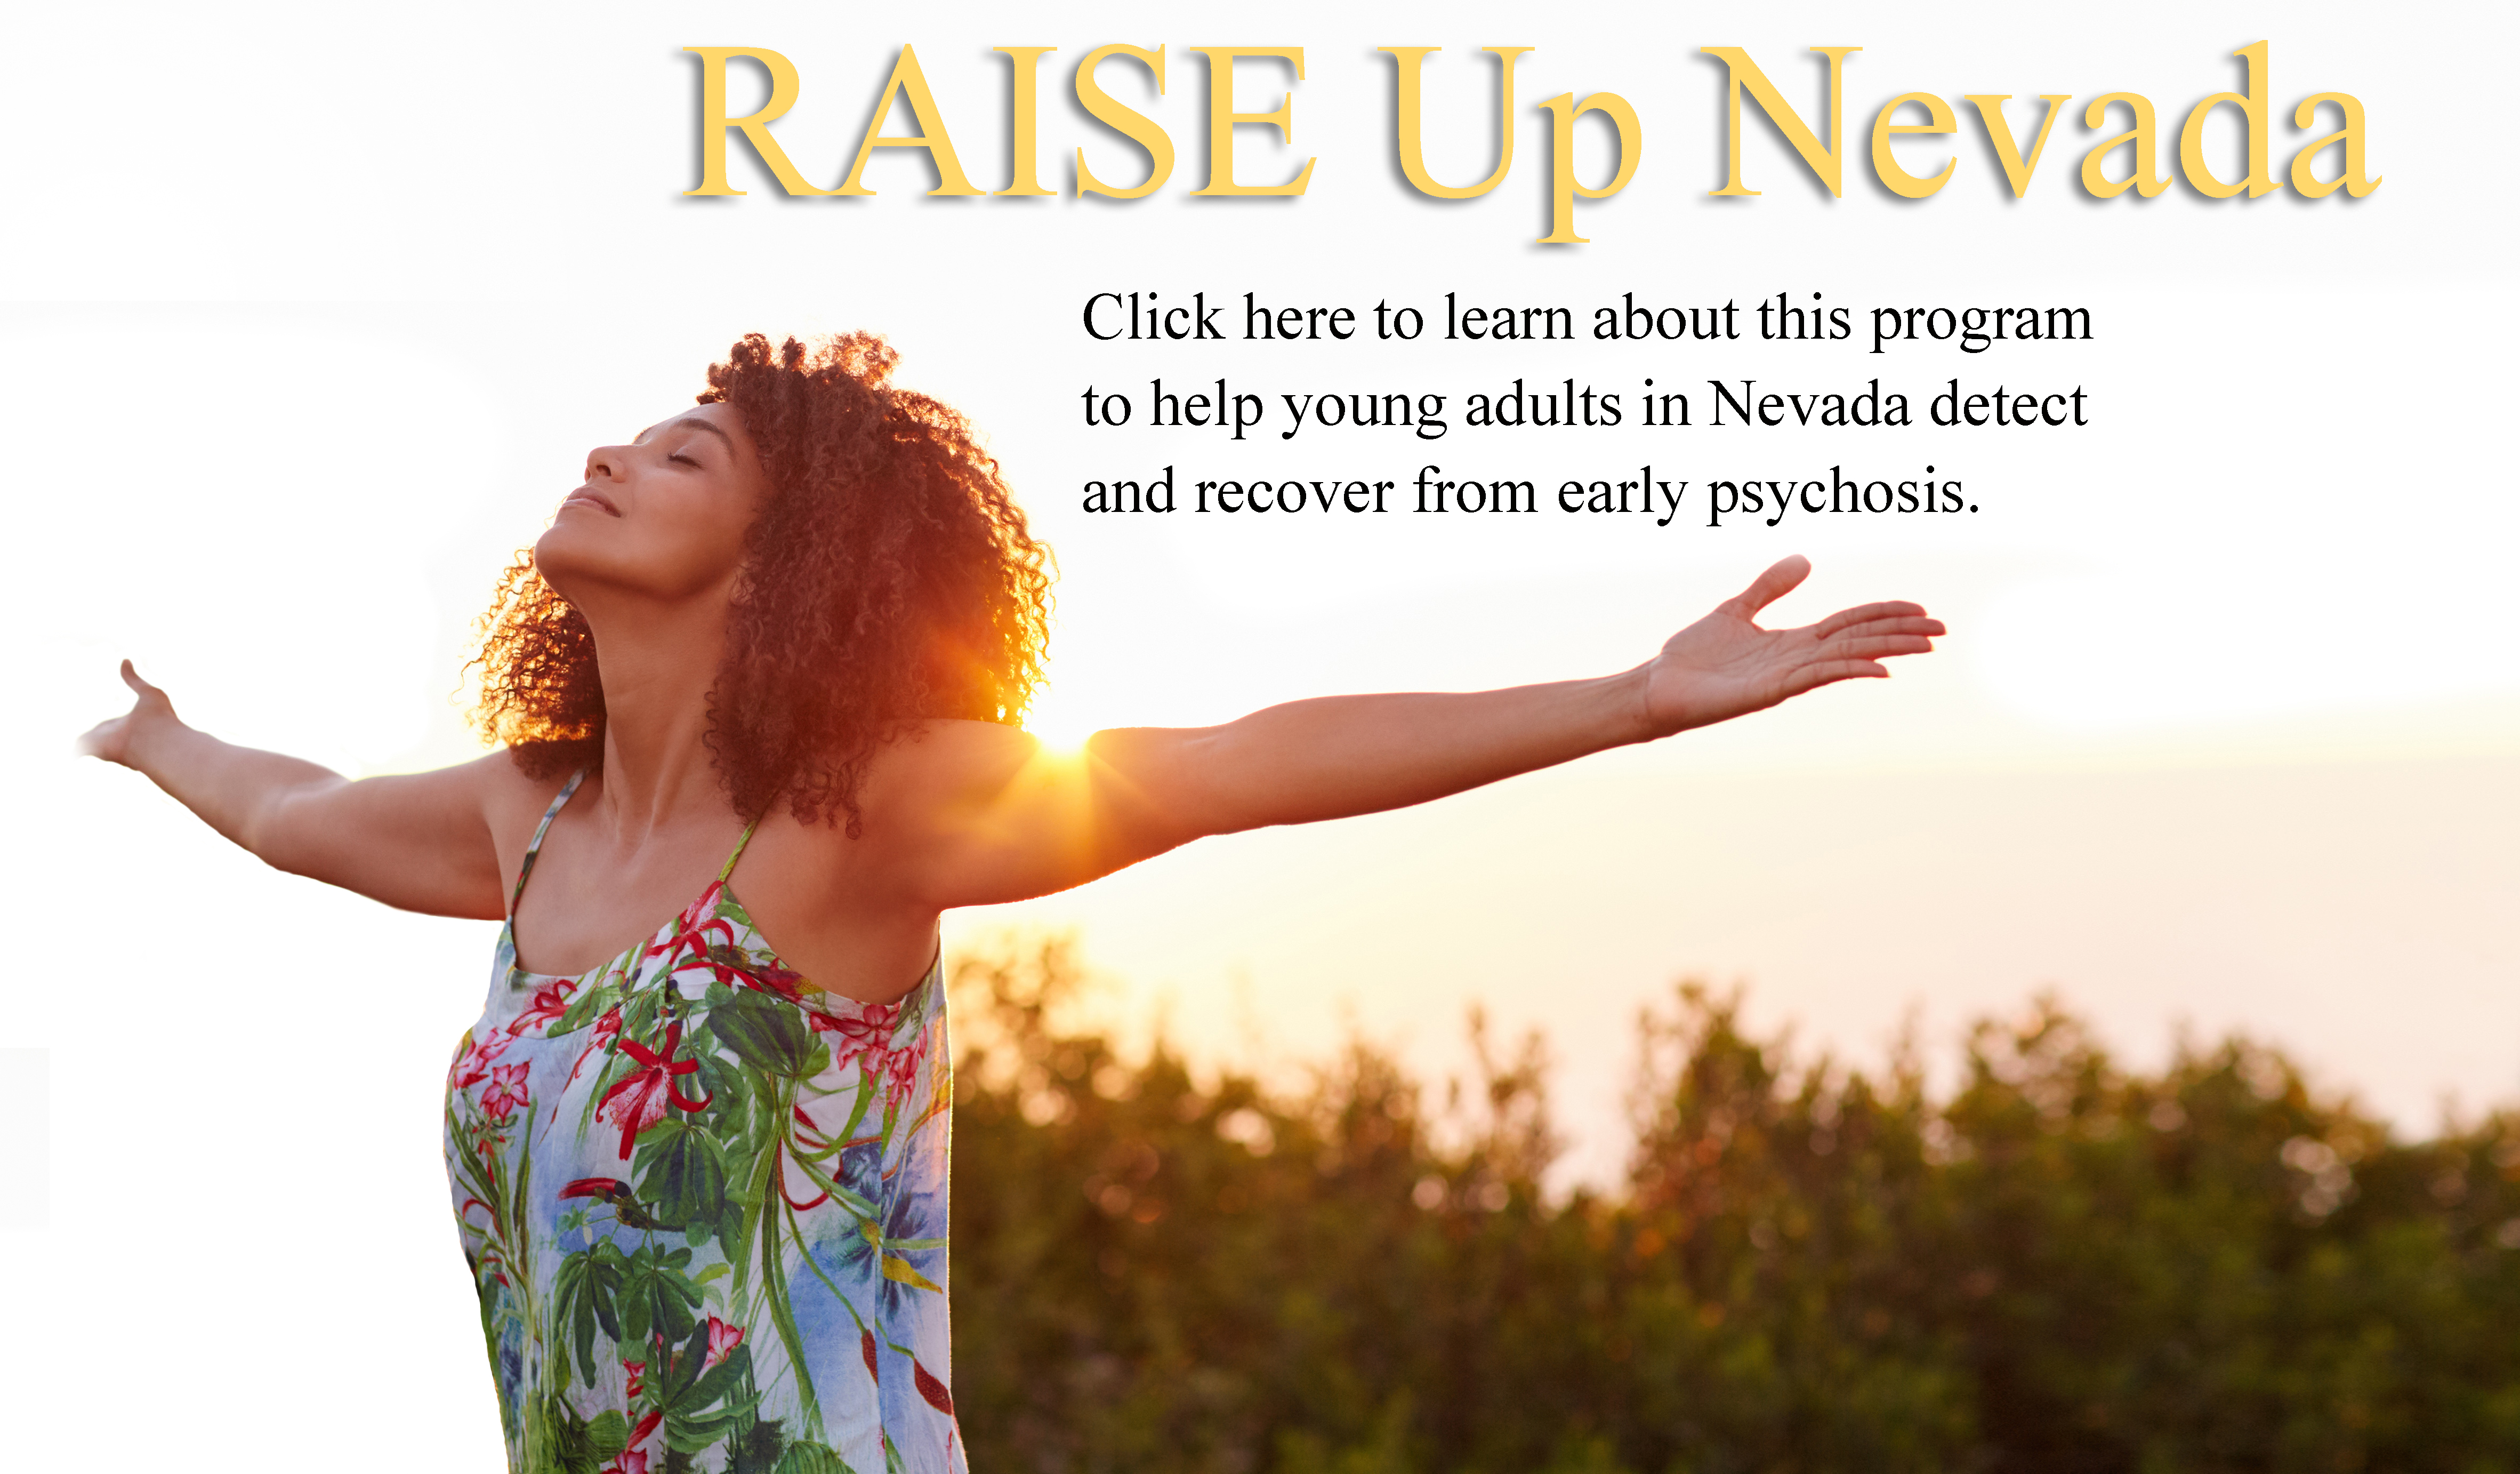 Link to Recovery After Initial Schizophrenic Episode program information, better known as RAISE Up Nevada